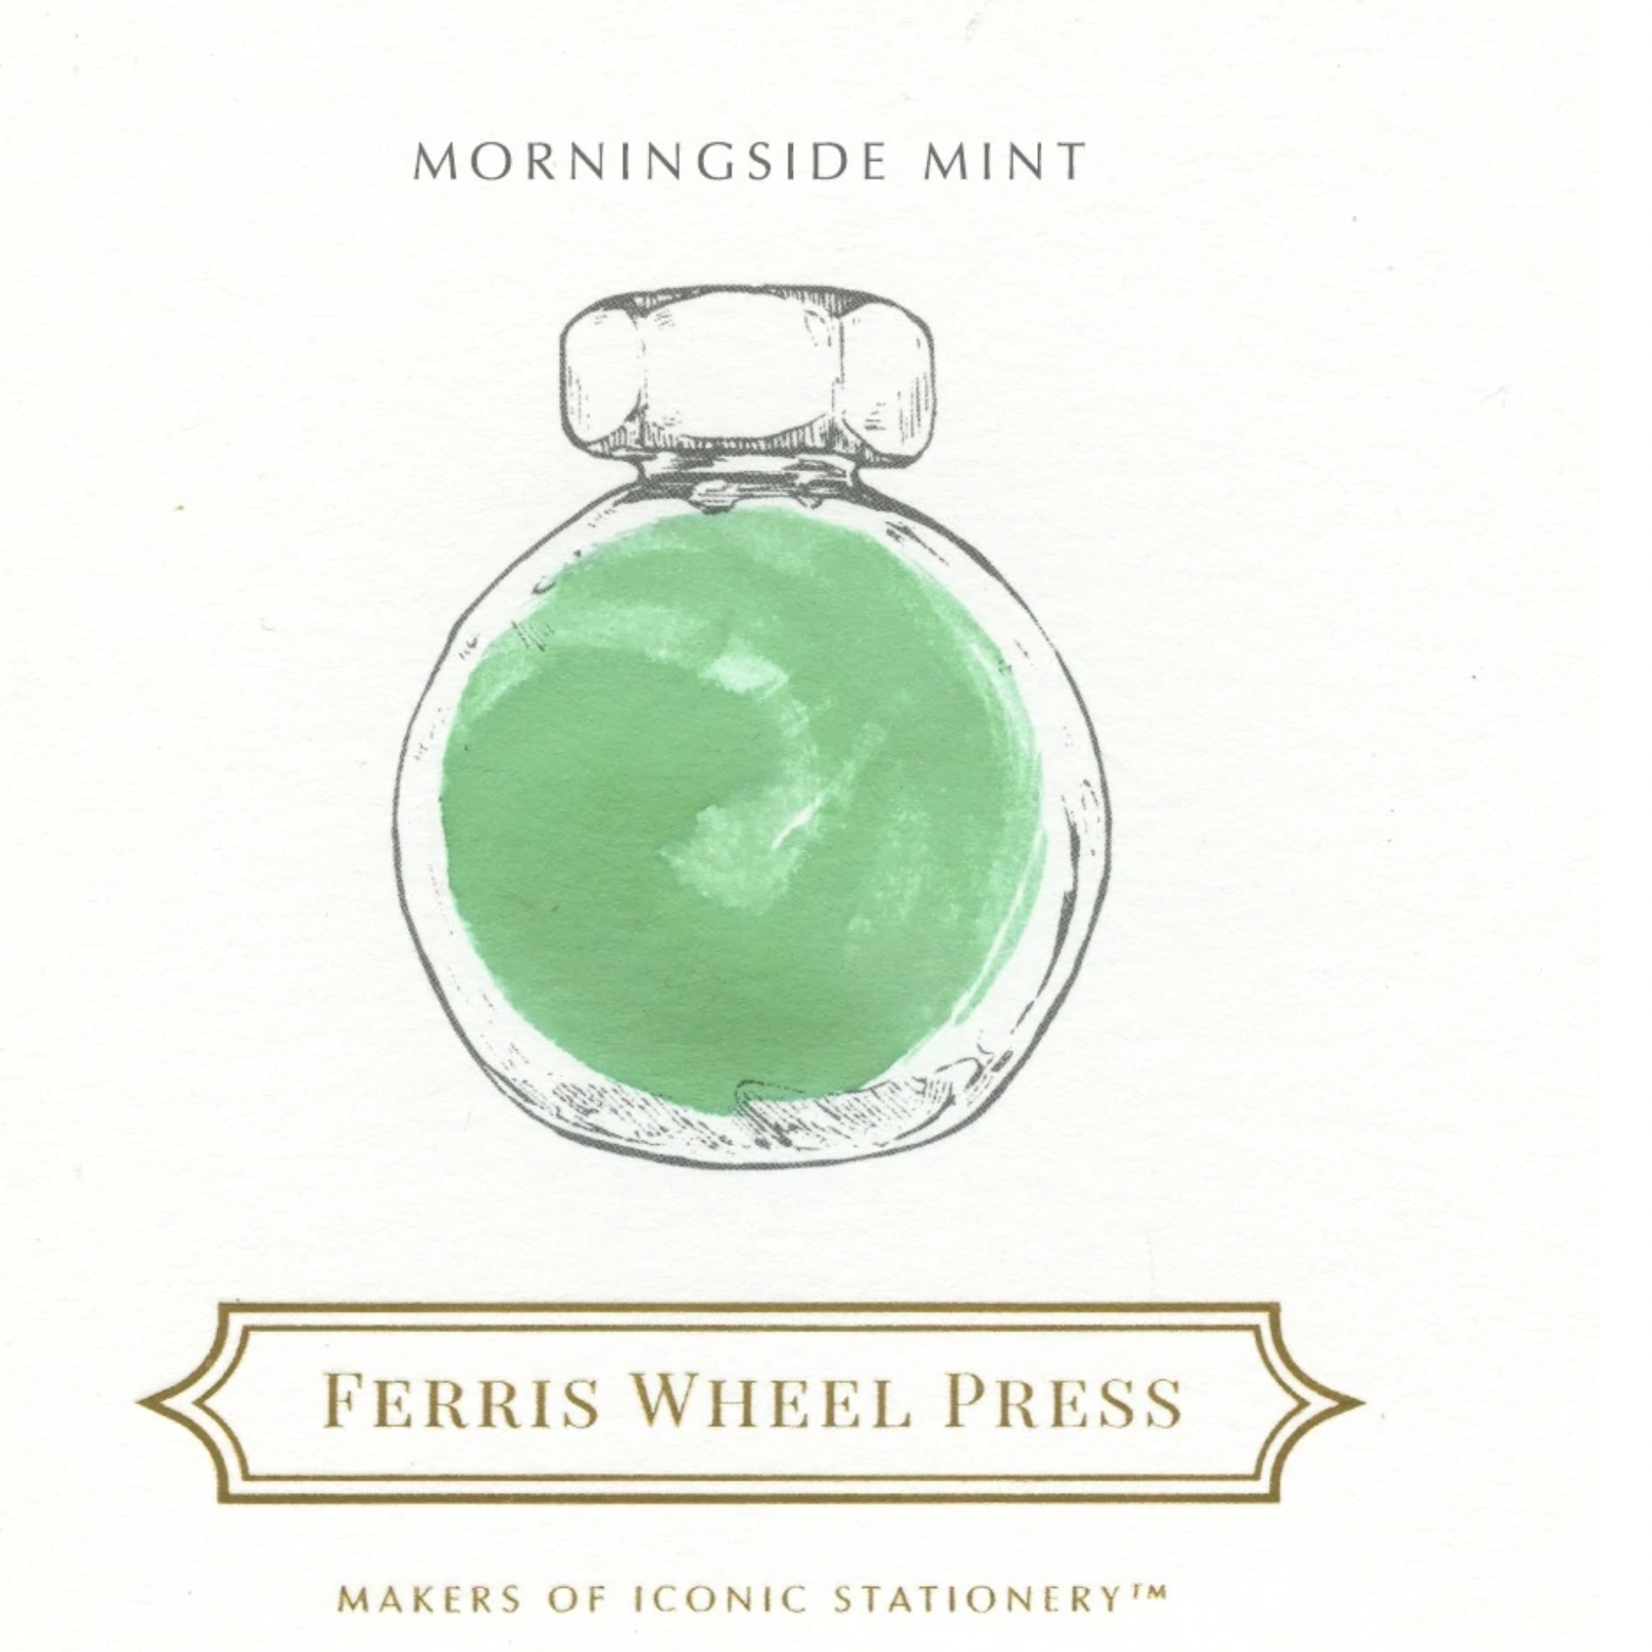 FERRIS WHEEL PRESS INK CHARGER SET MORNINGSIDE COLLECTION